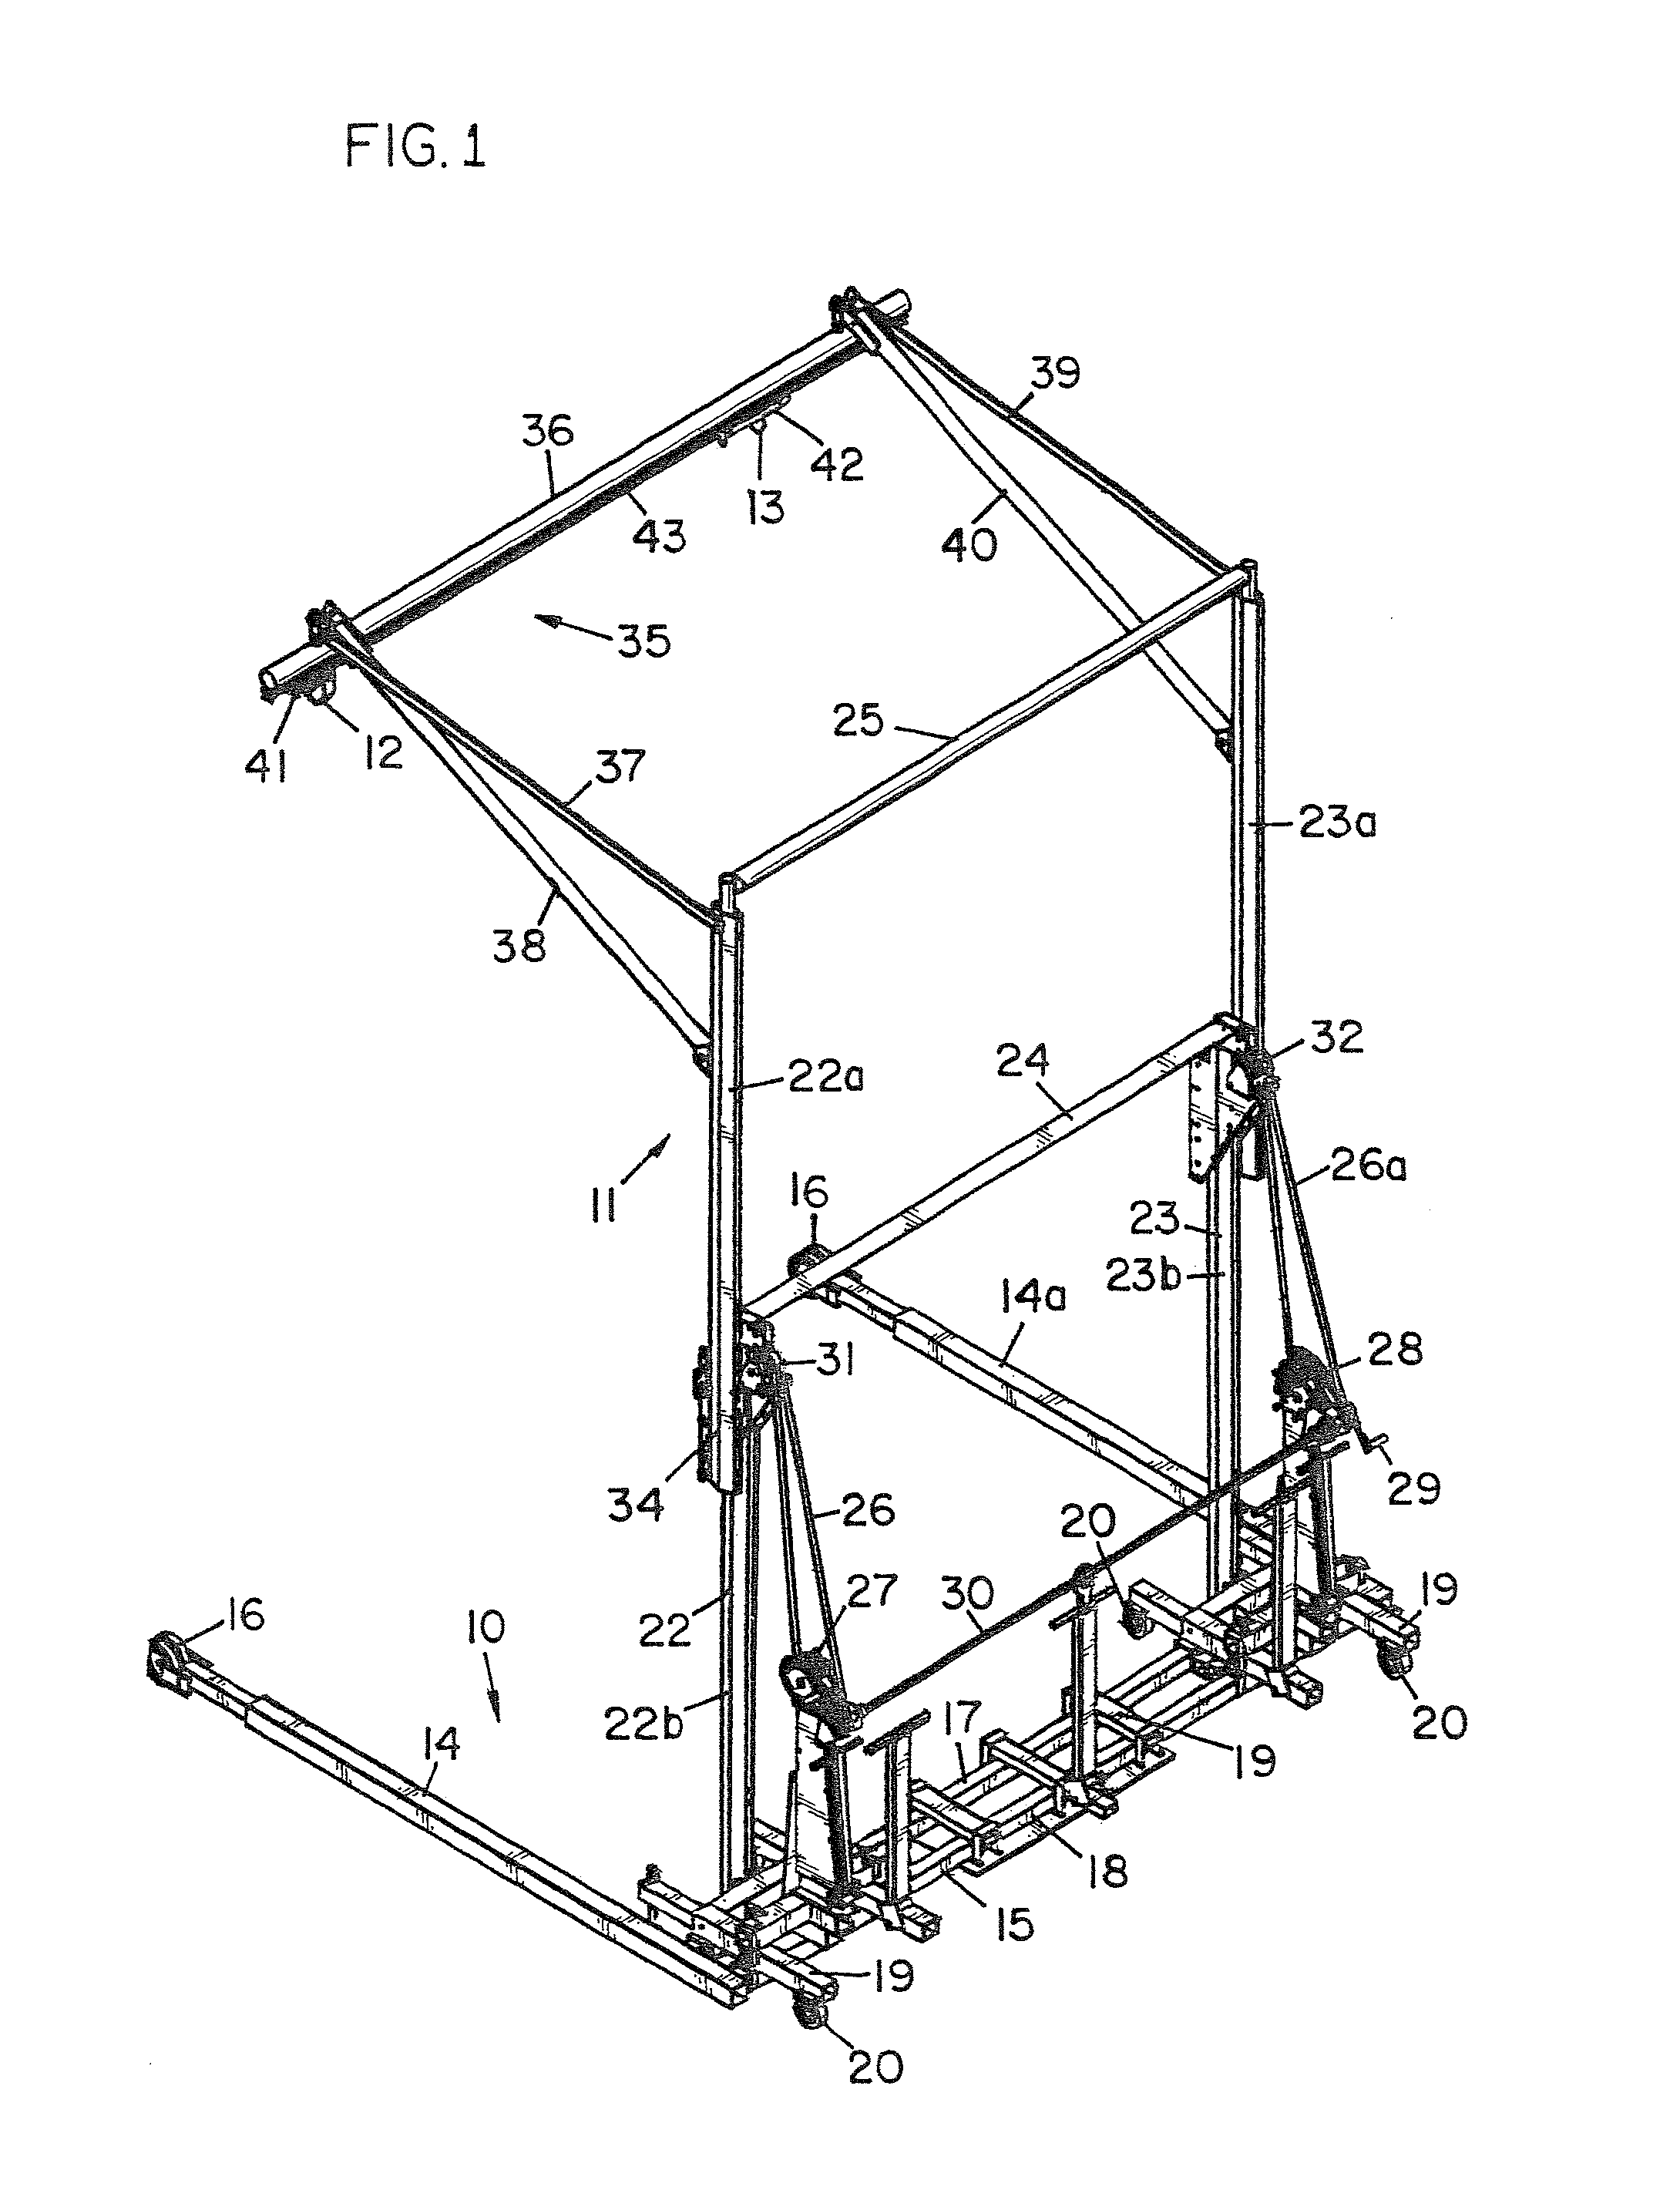 Mobile mount for attachment of a fall arrest system